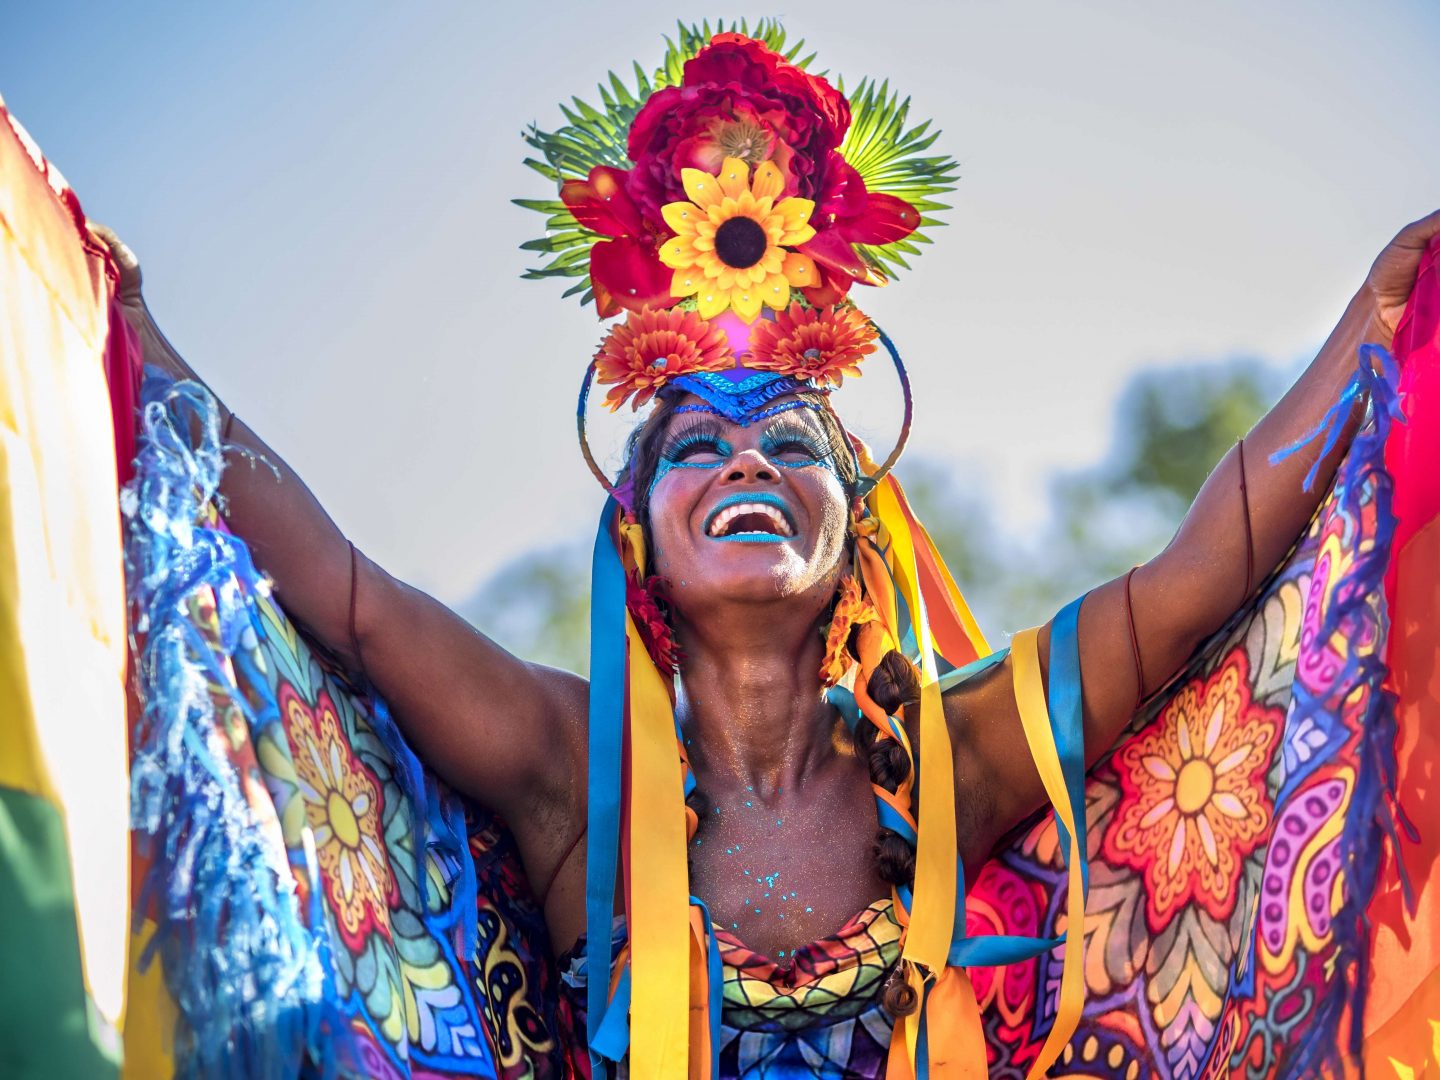 An experience like no other at Rio Carnival